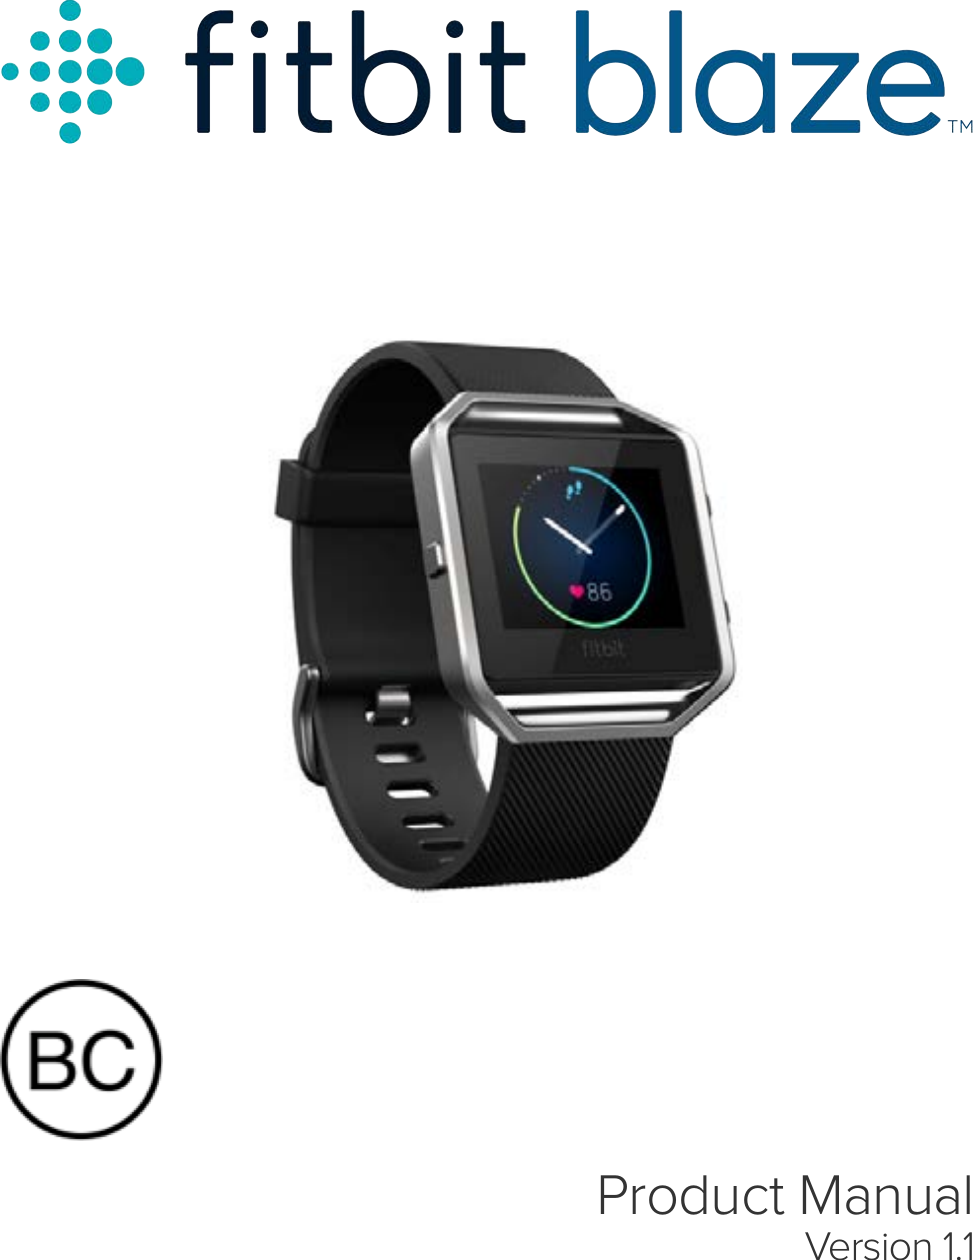 how to set up fitbit blaze for new user